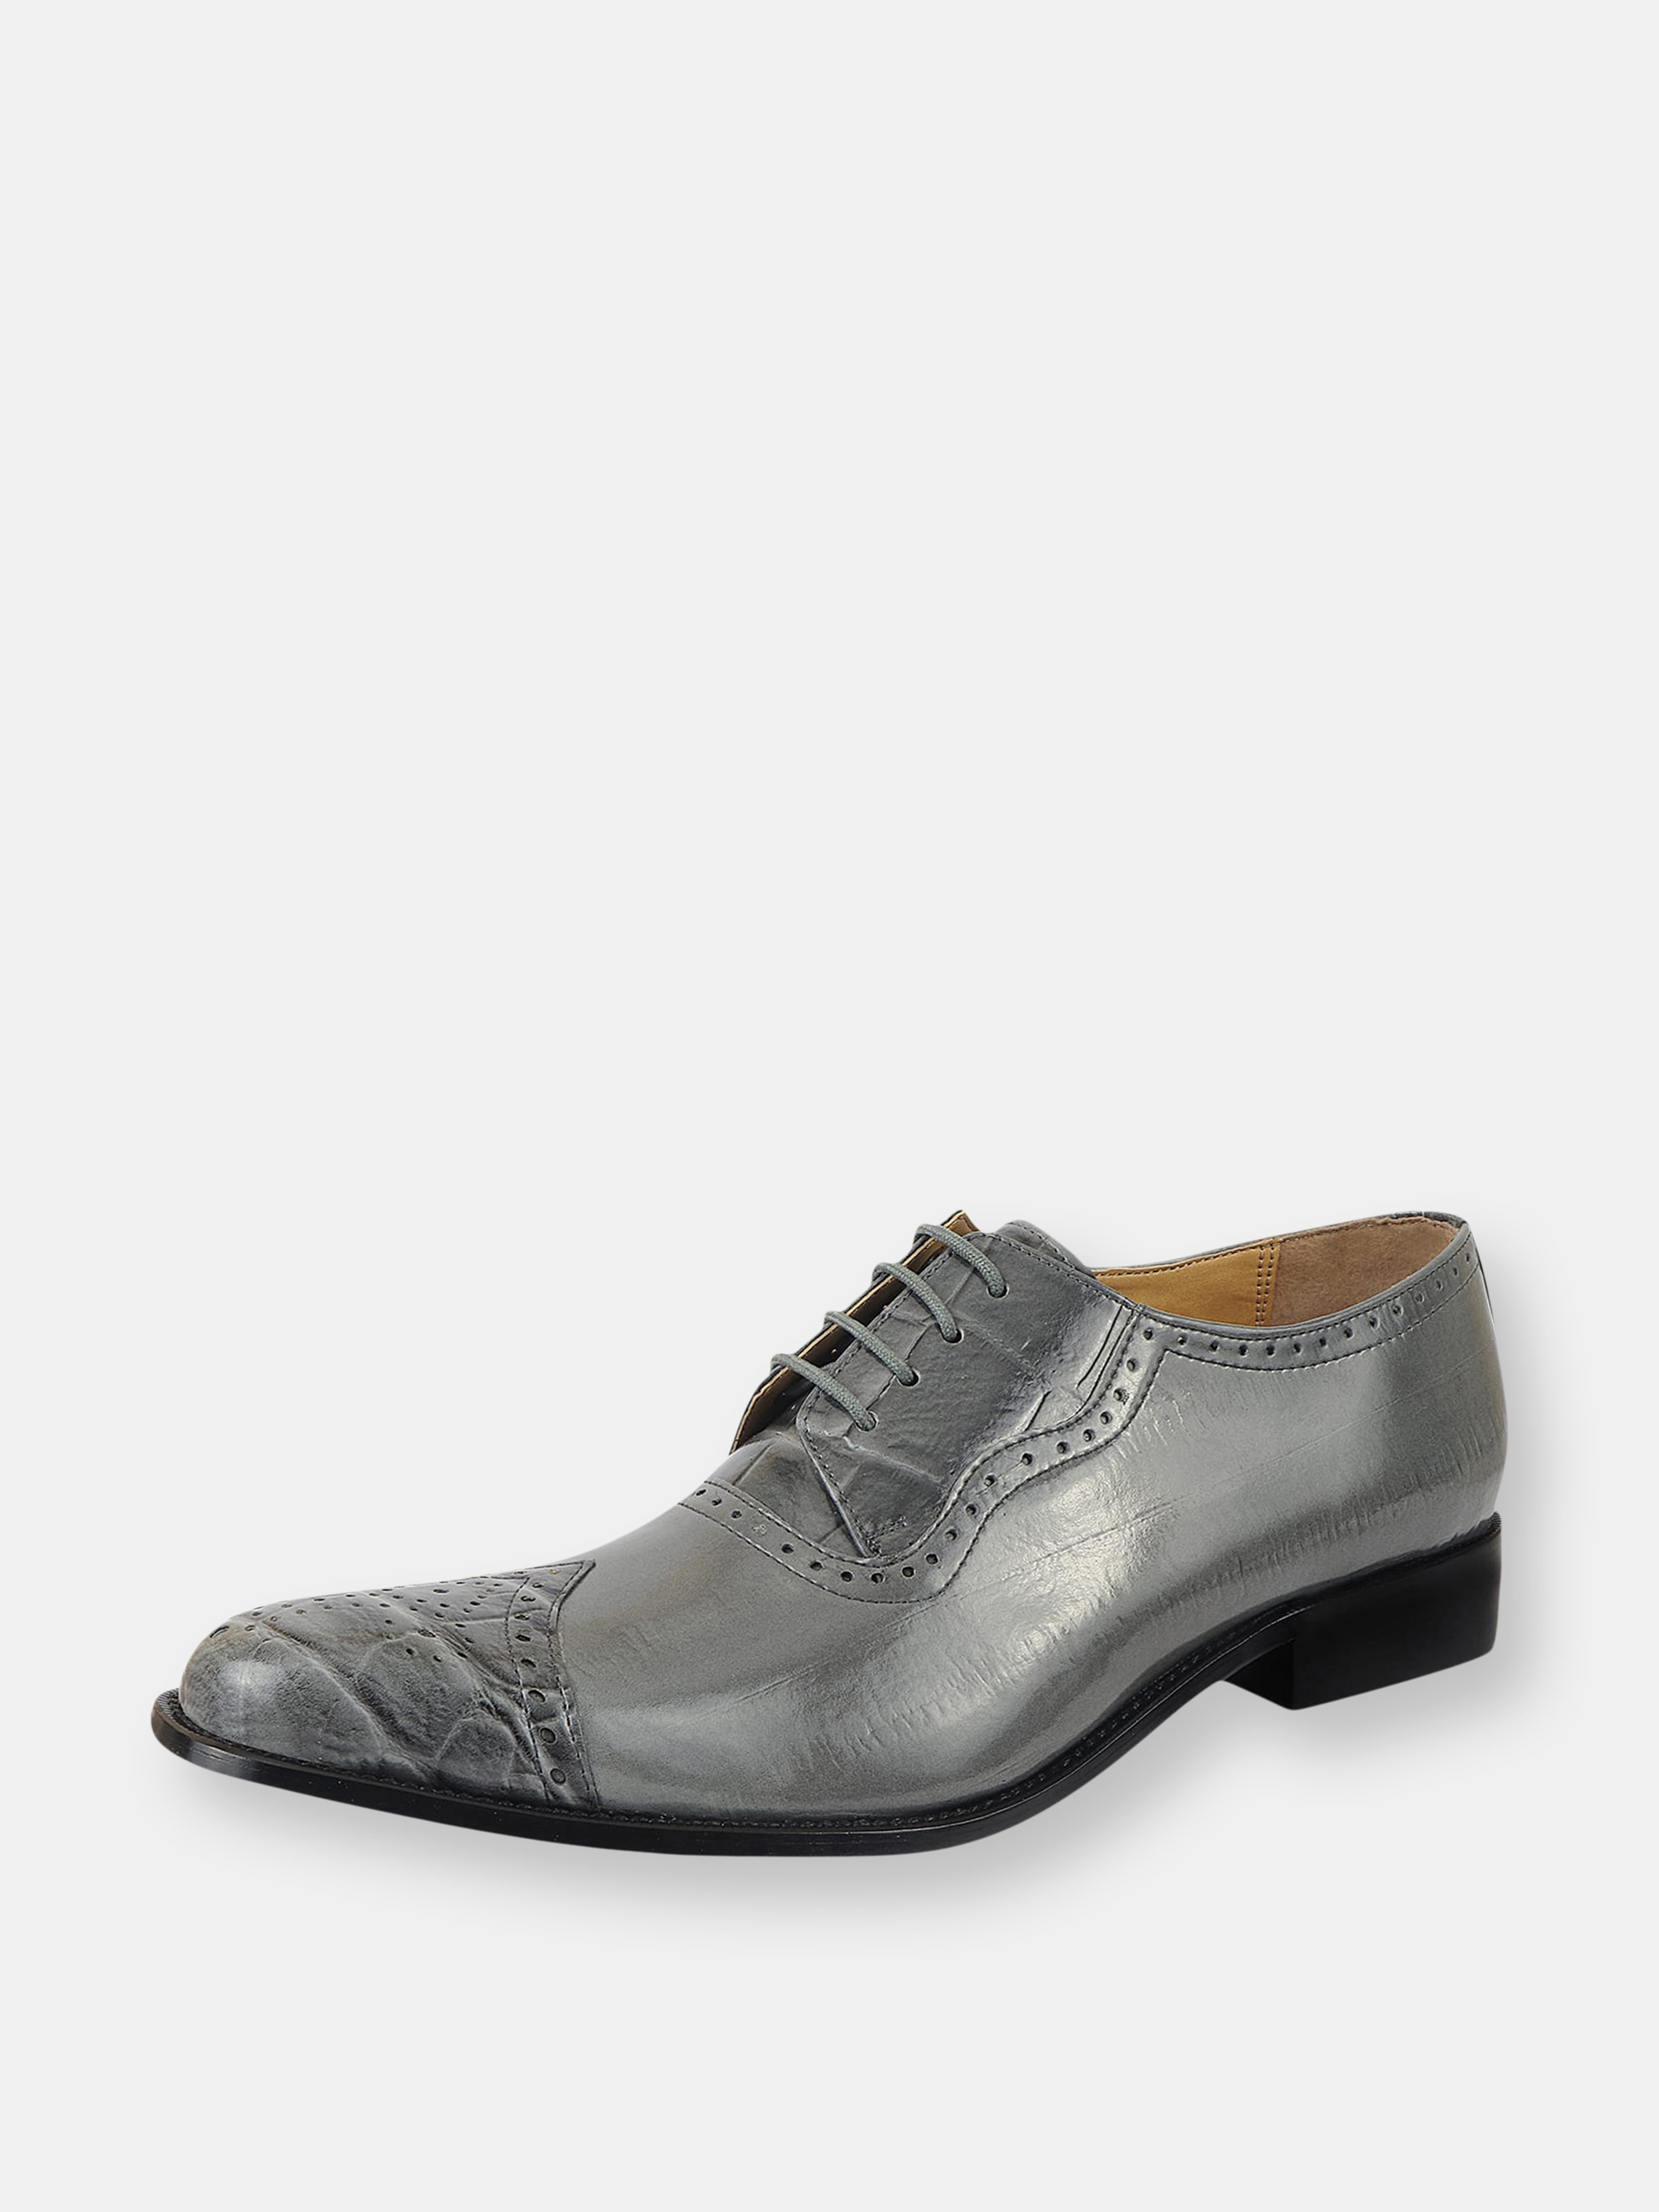 Libertyzeno Henley Man Made Oxford Style Dress Shoes In Grey